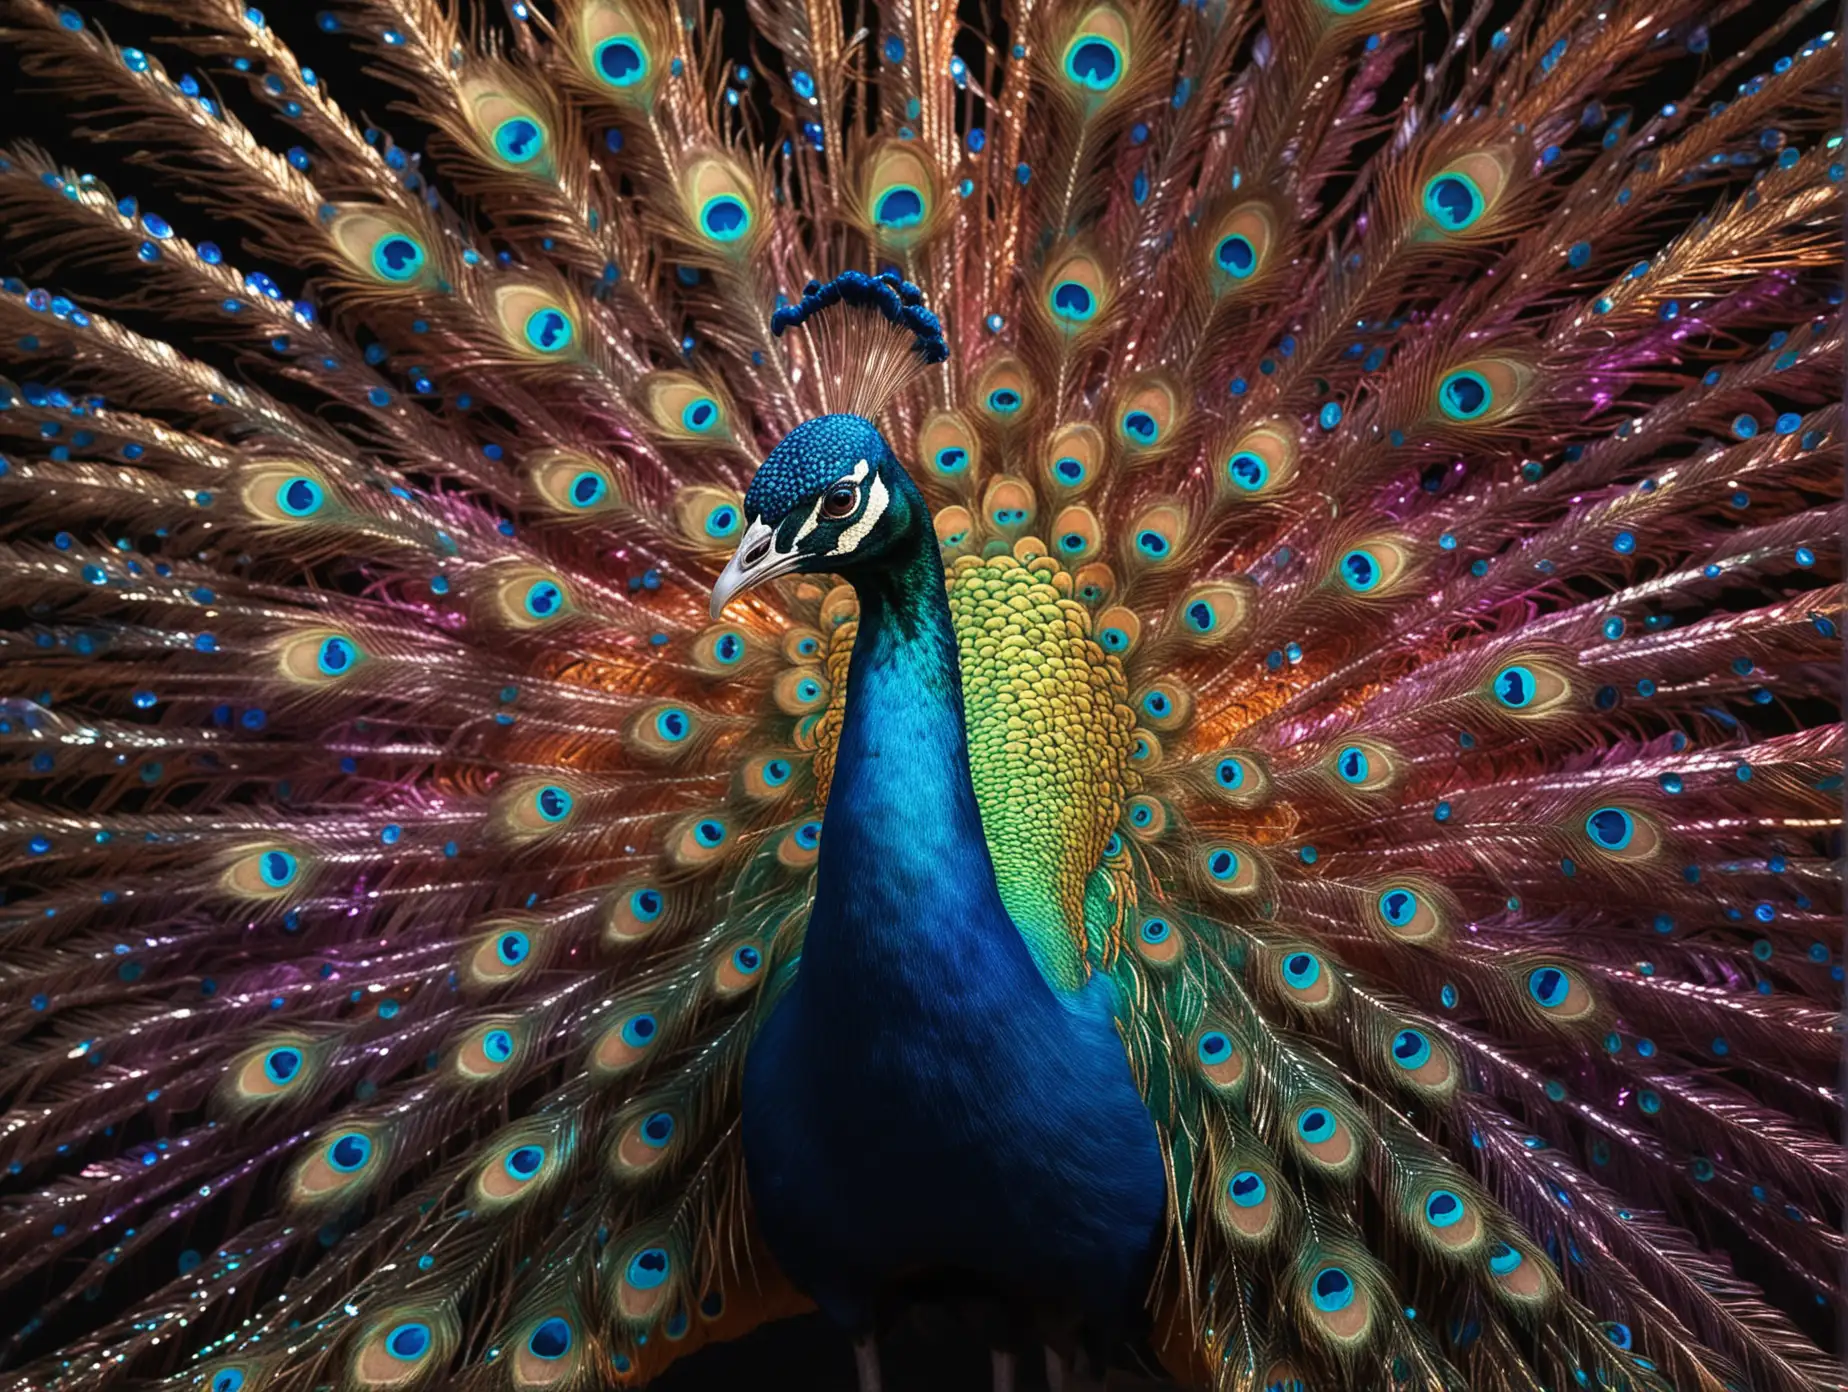 Majestic Peacock Vibrant 3D Rendering of a Radiant Bird